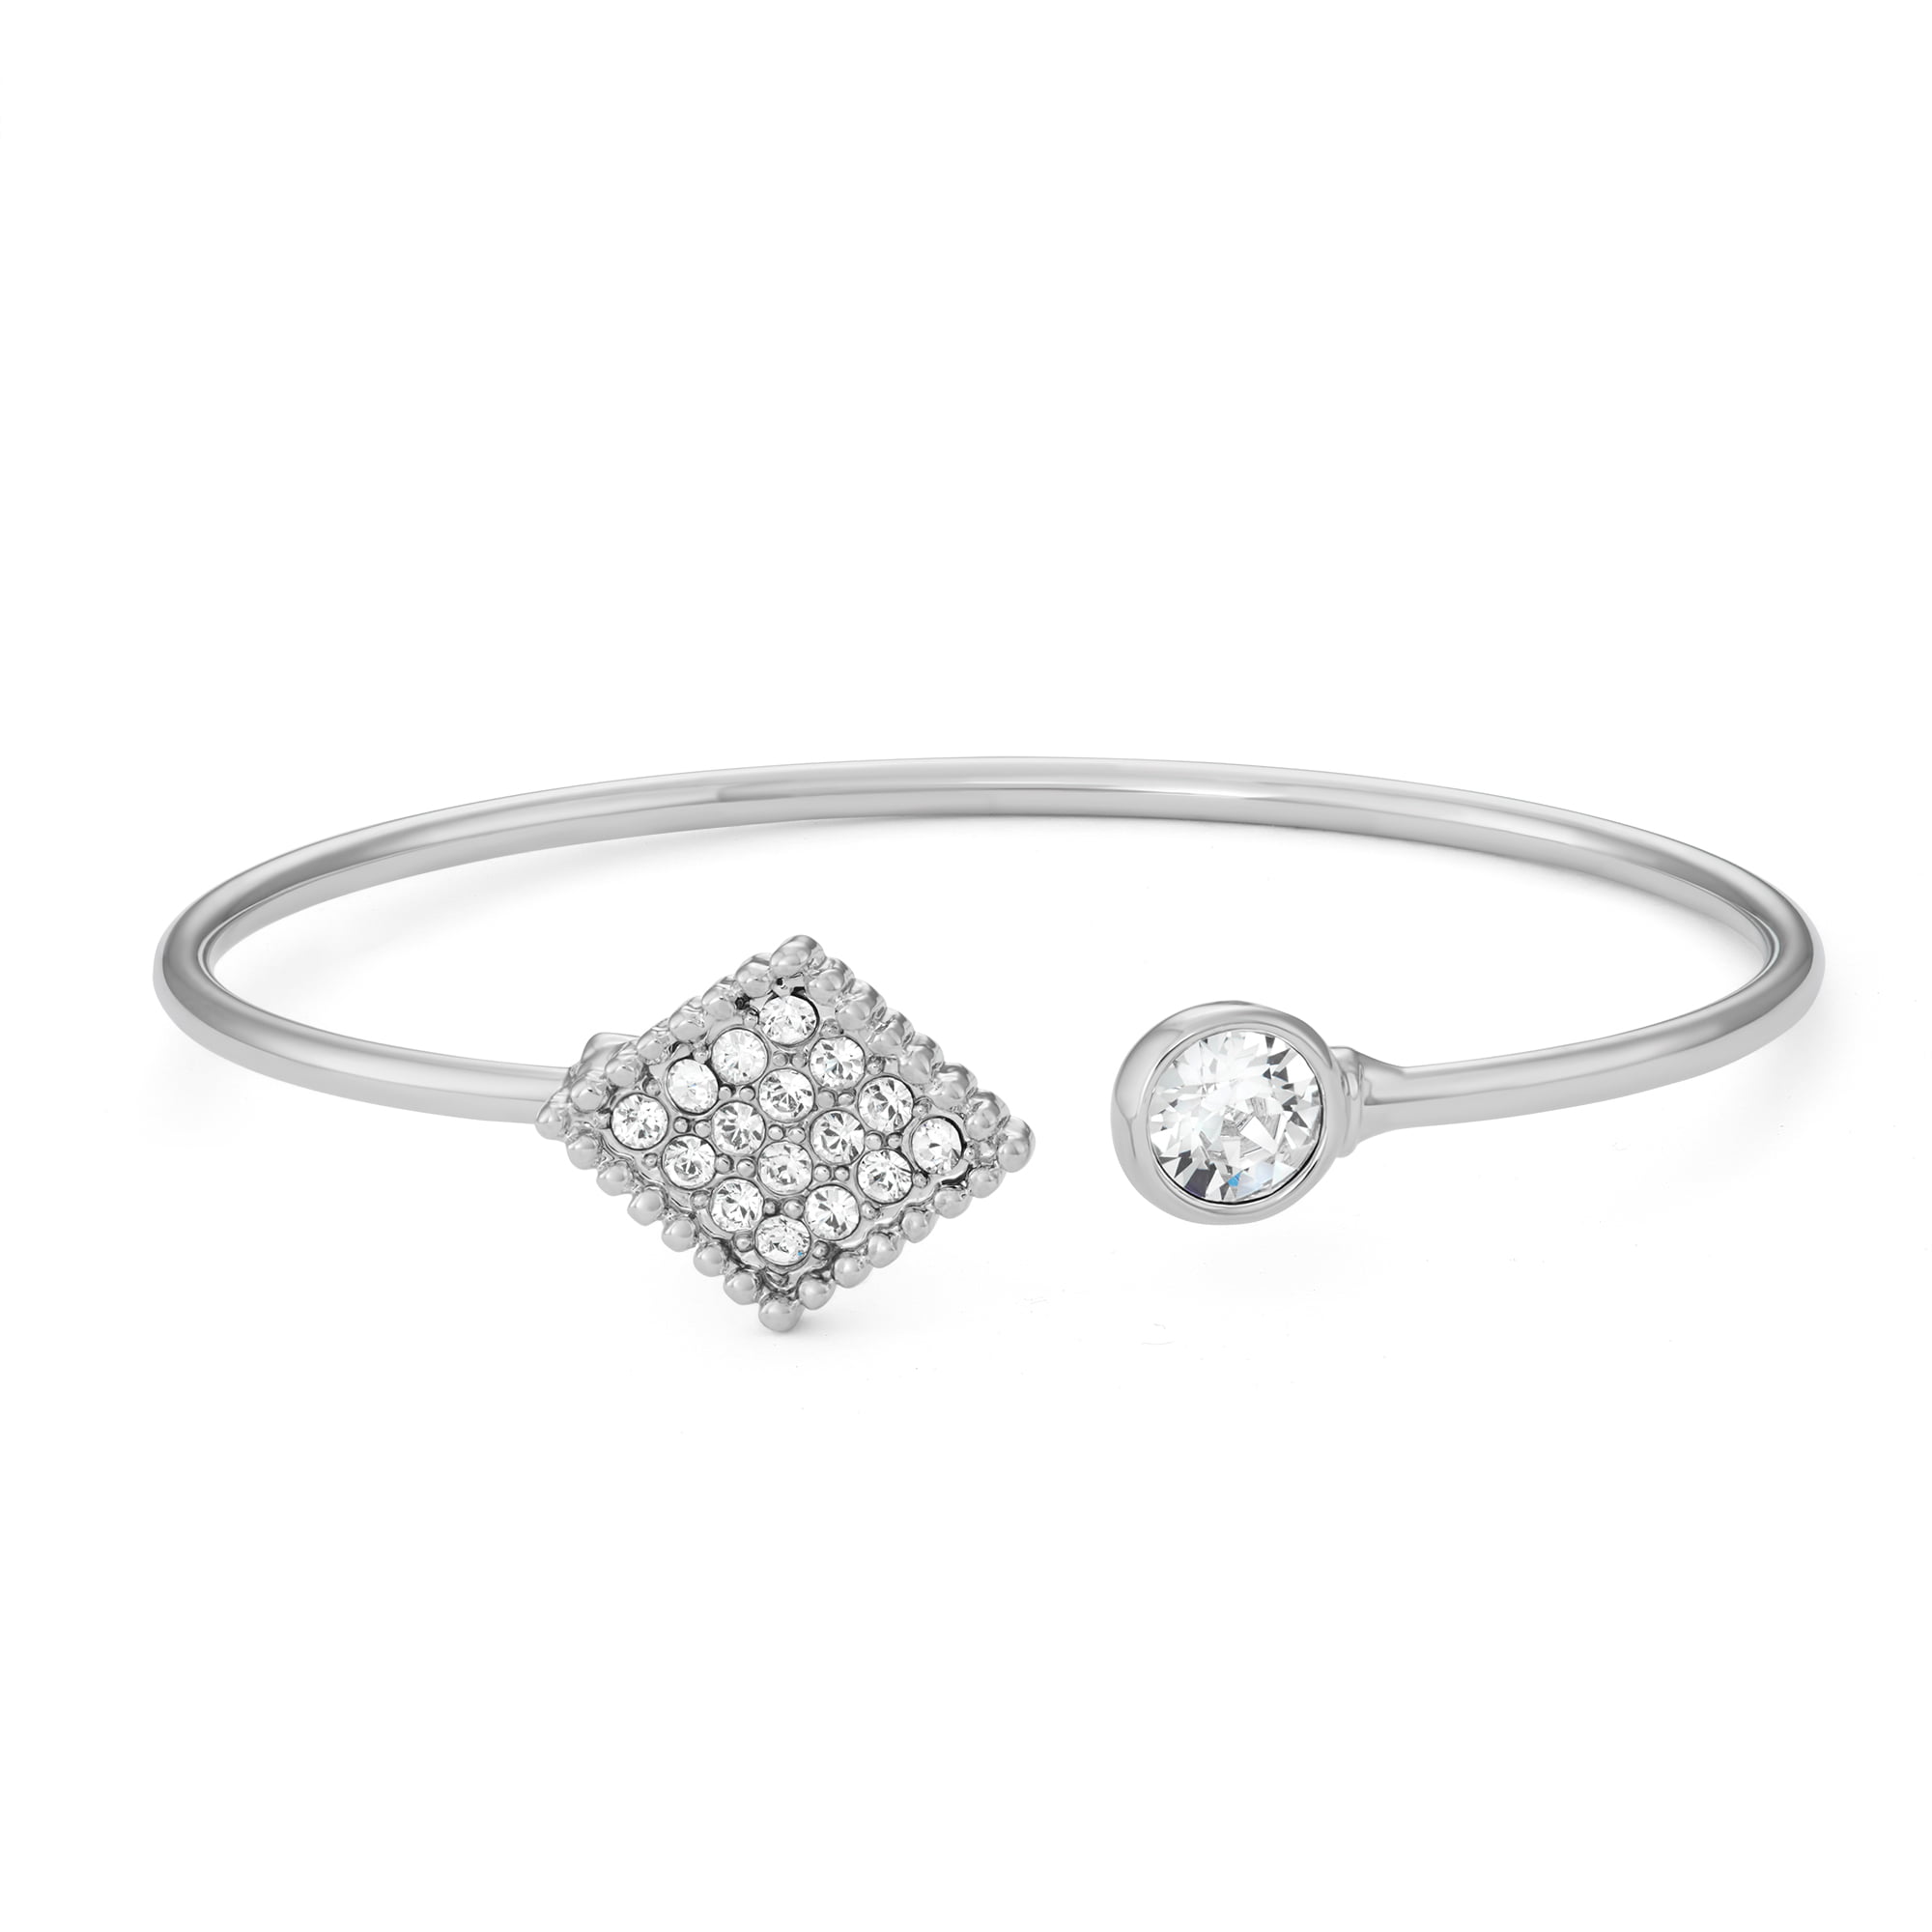 Rhodium Plated Open End Bangle Bracelet With Crystal Diamond, Made With ...